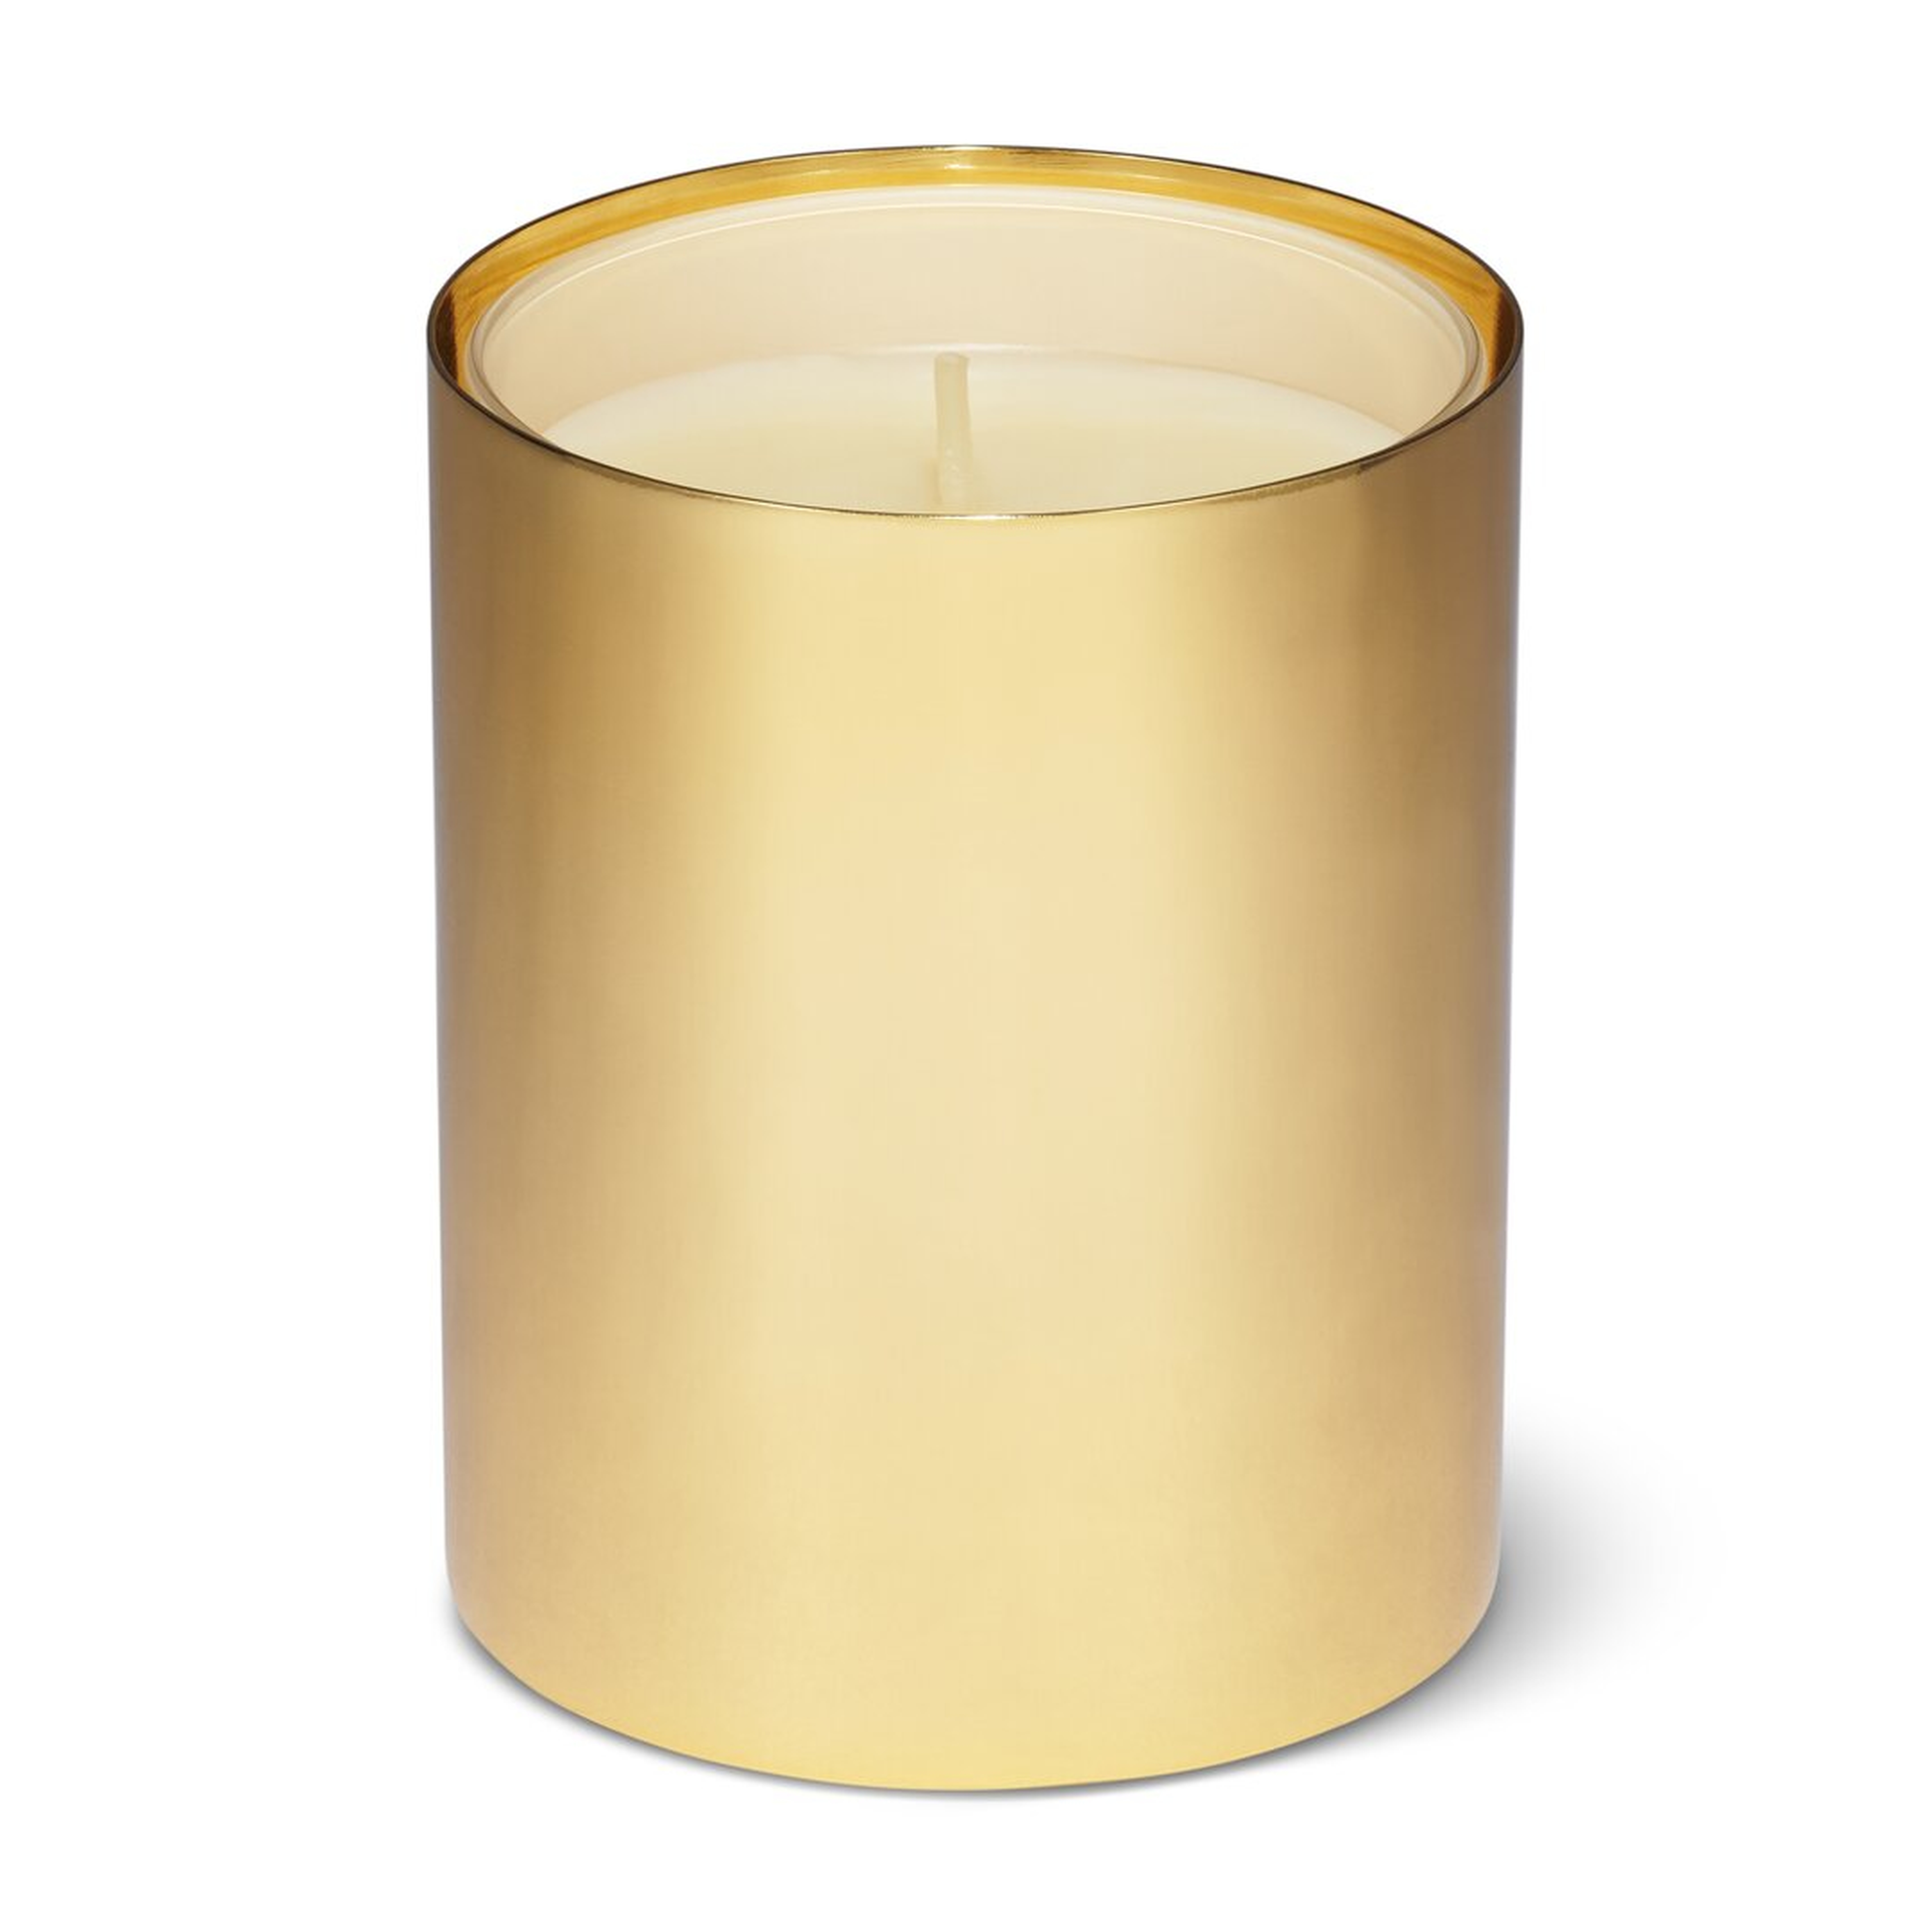 AERIN Brass Candle Sleeve Holder - Perigold